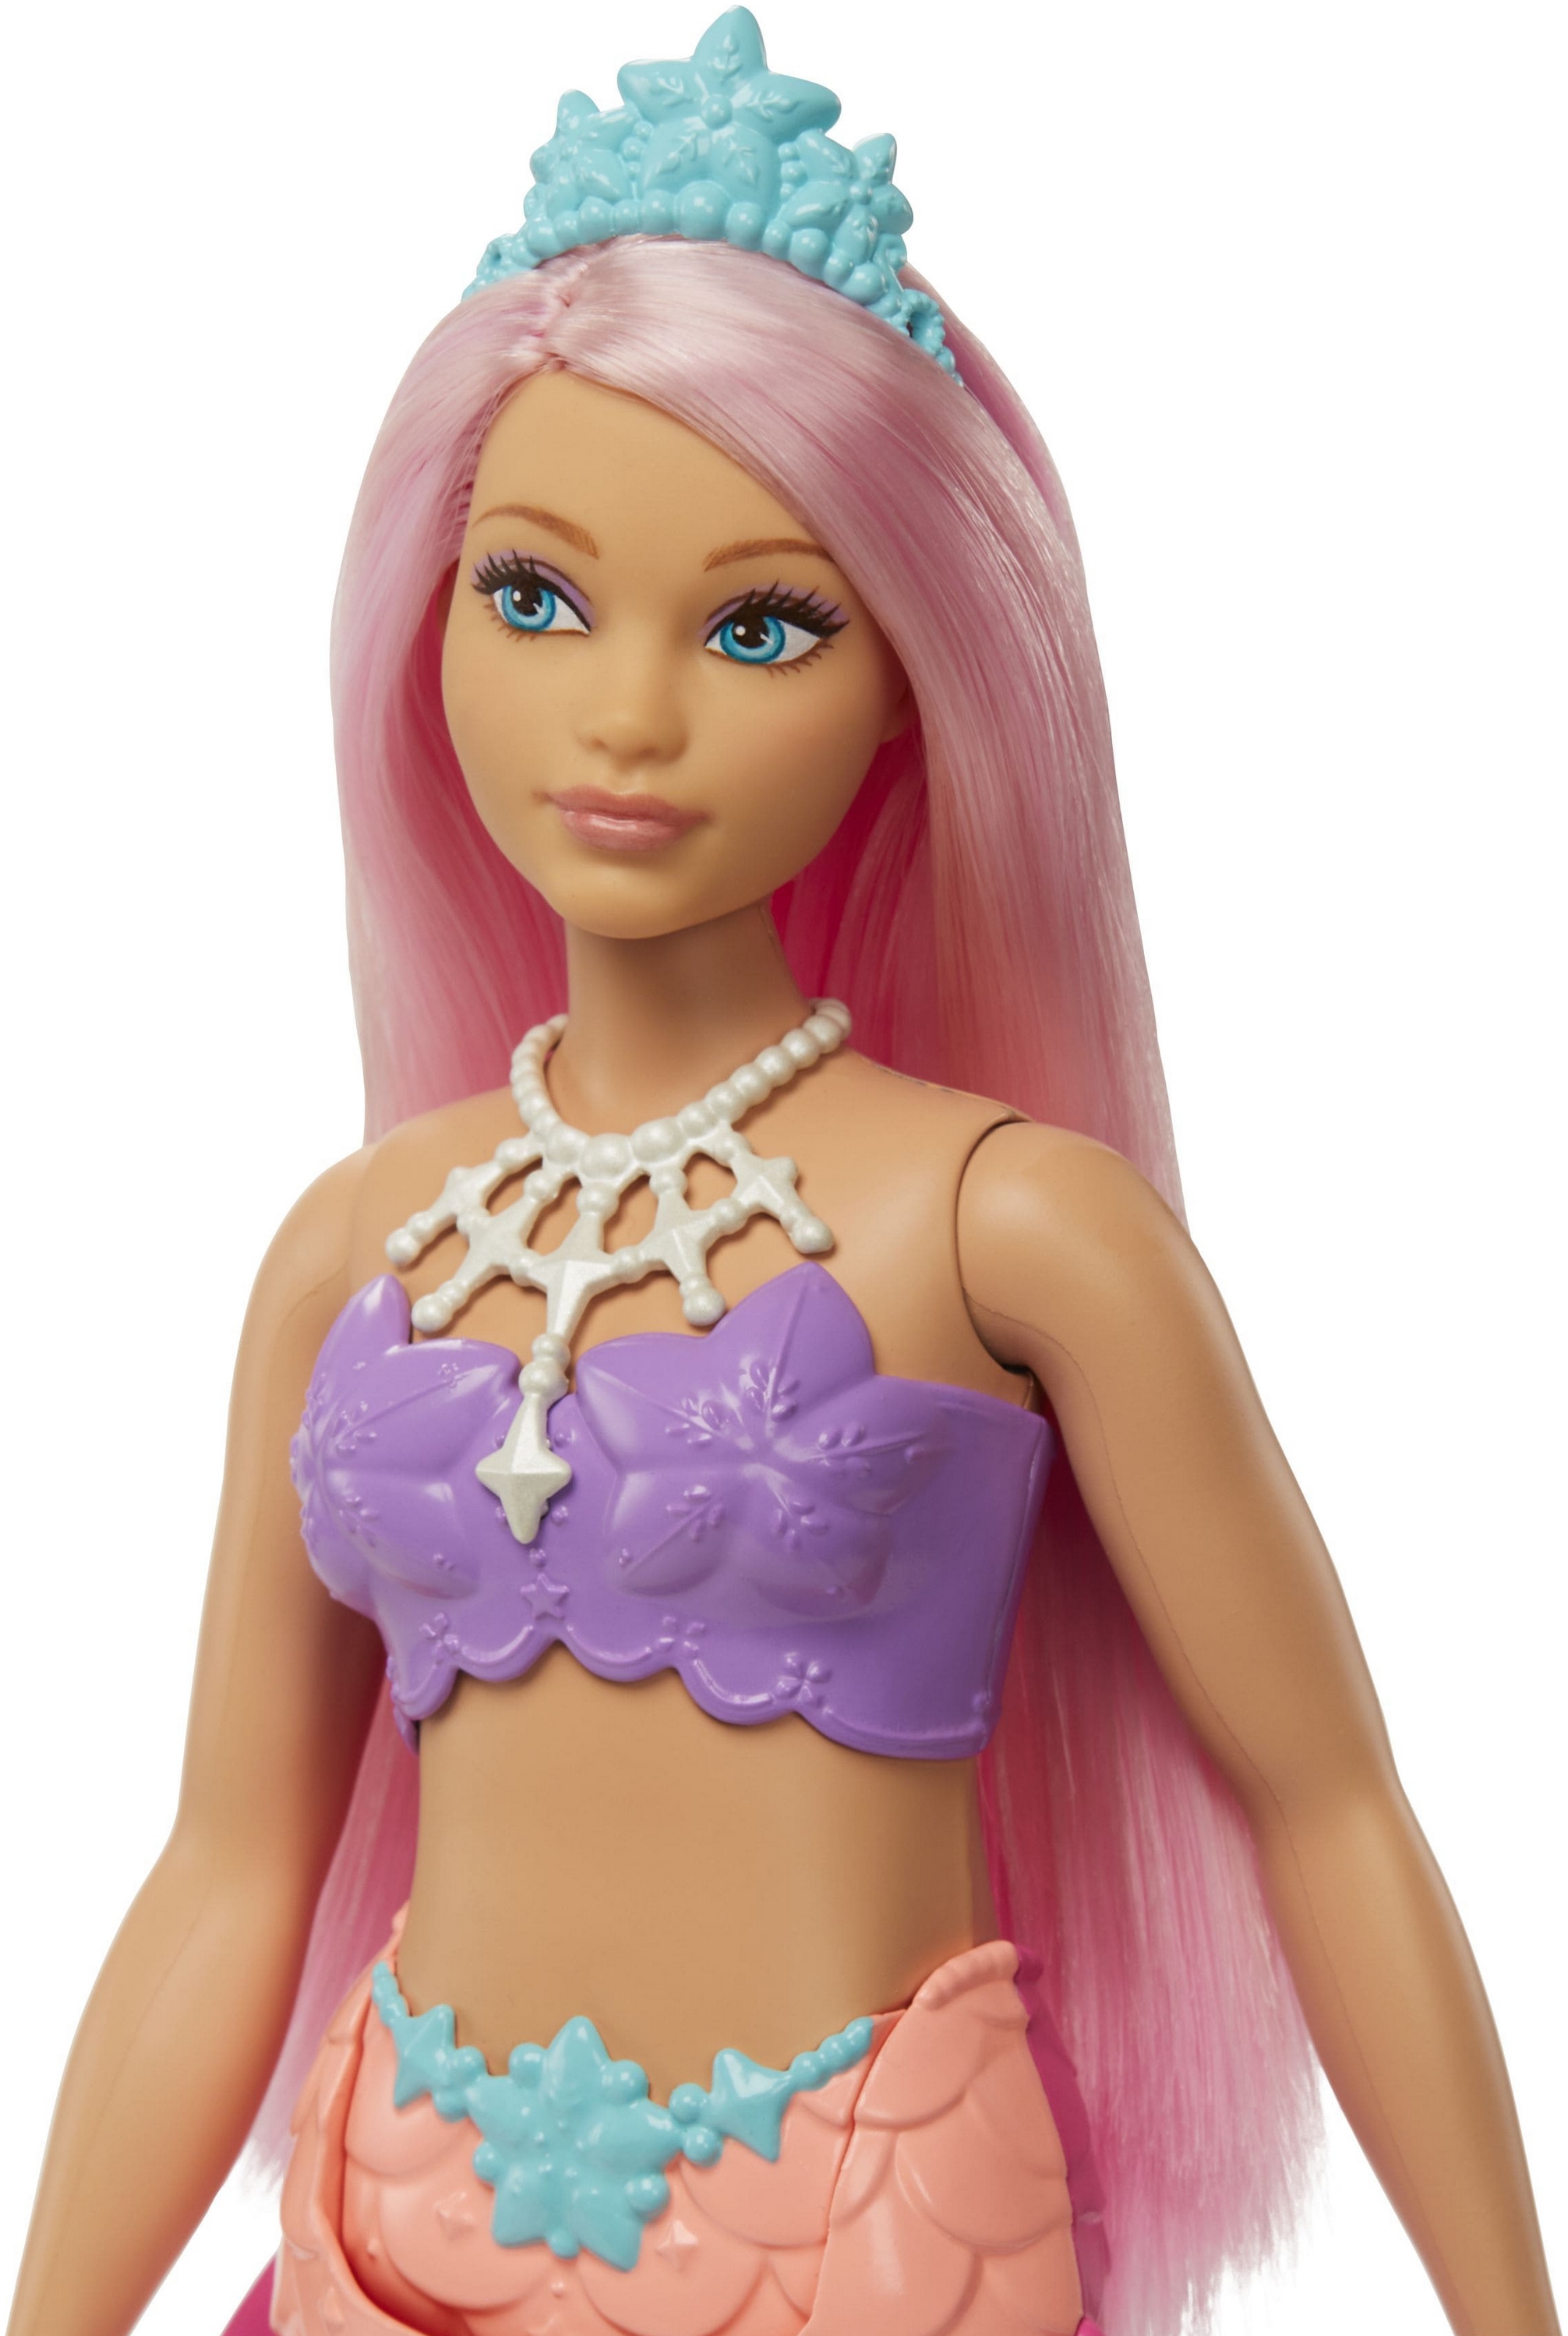 Goodwill overflow Candy New Barbie Dreamtopia Mermaid dolls 2022 - YouLoveIt.com